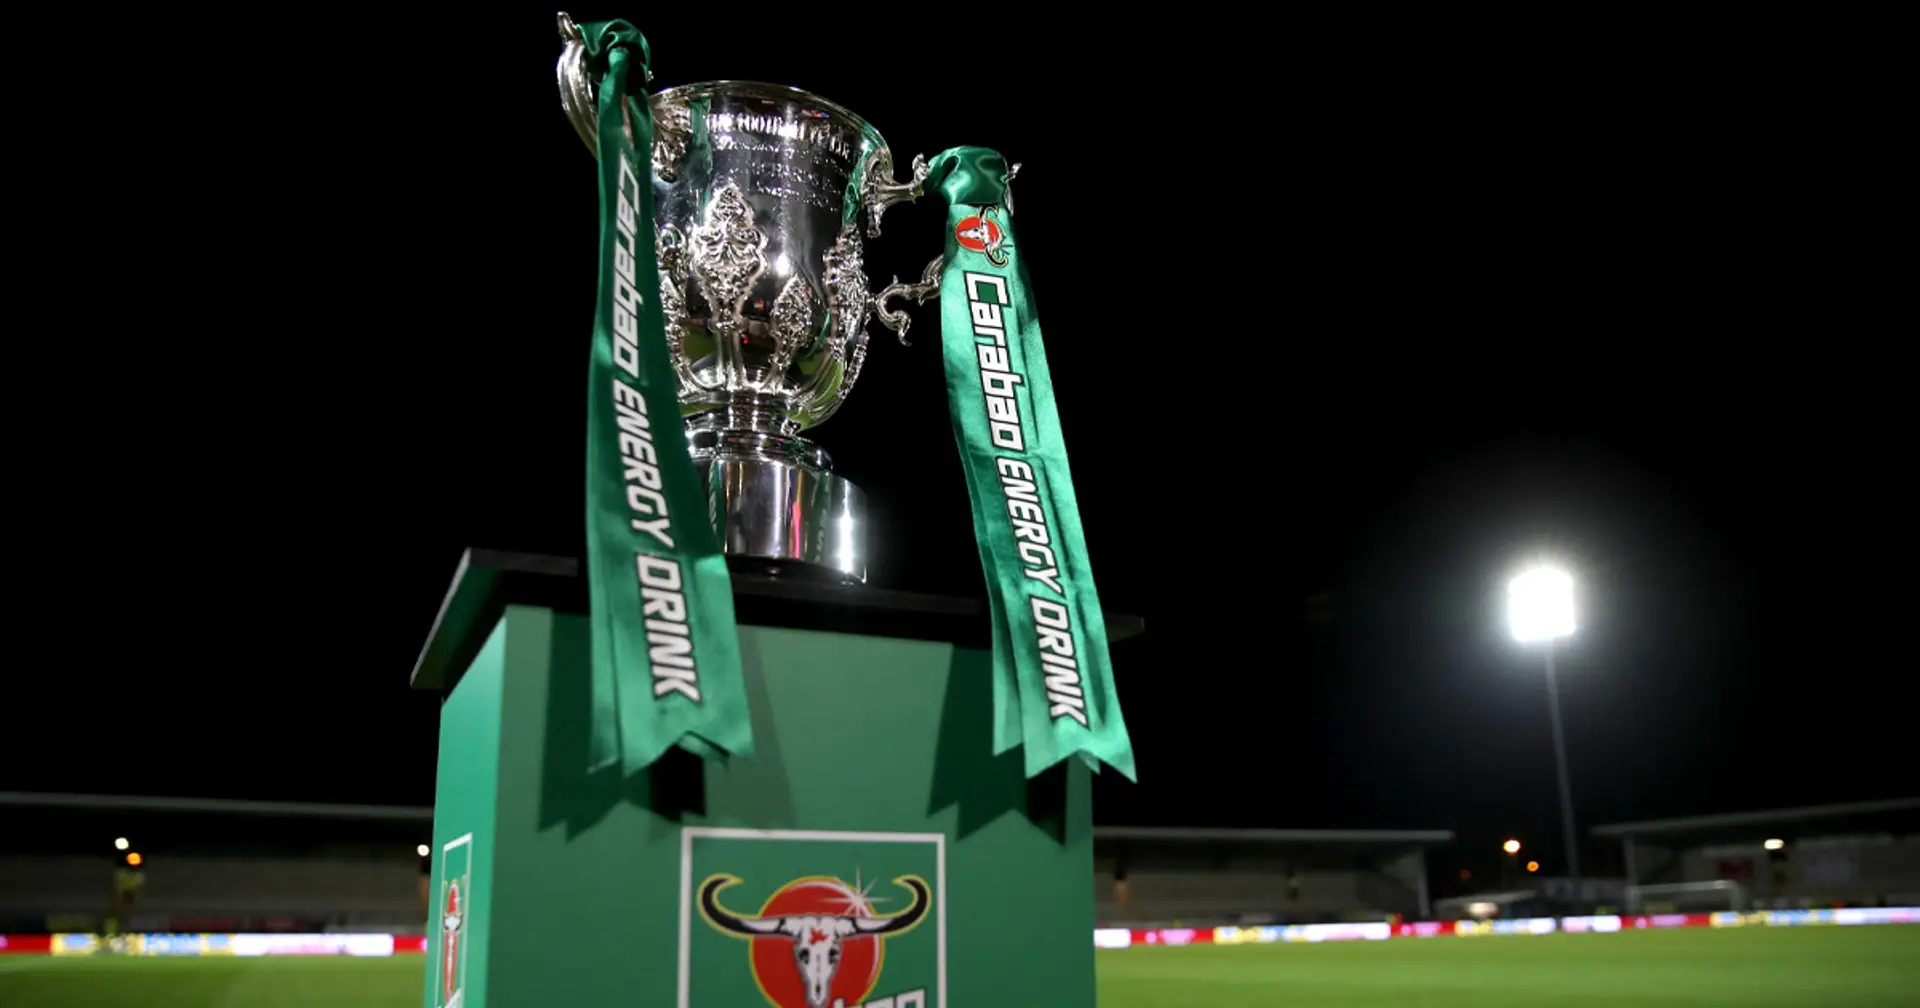 OFFICIAL: Liverpool to face Bradford or Lincoln in Carabao Cup 3rd round